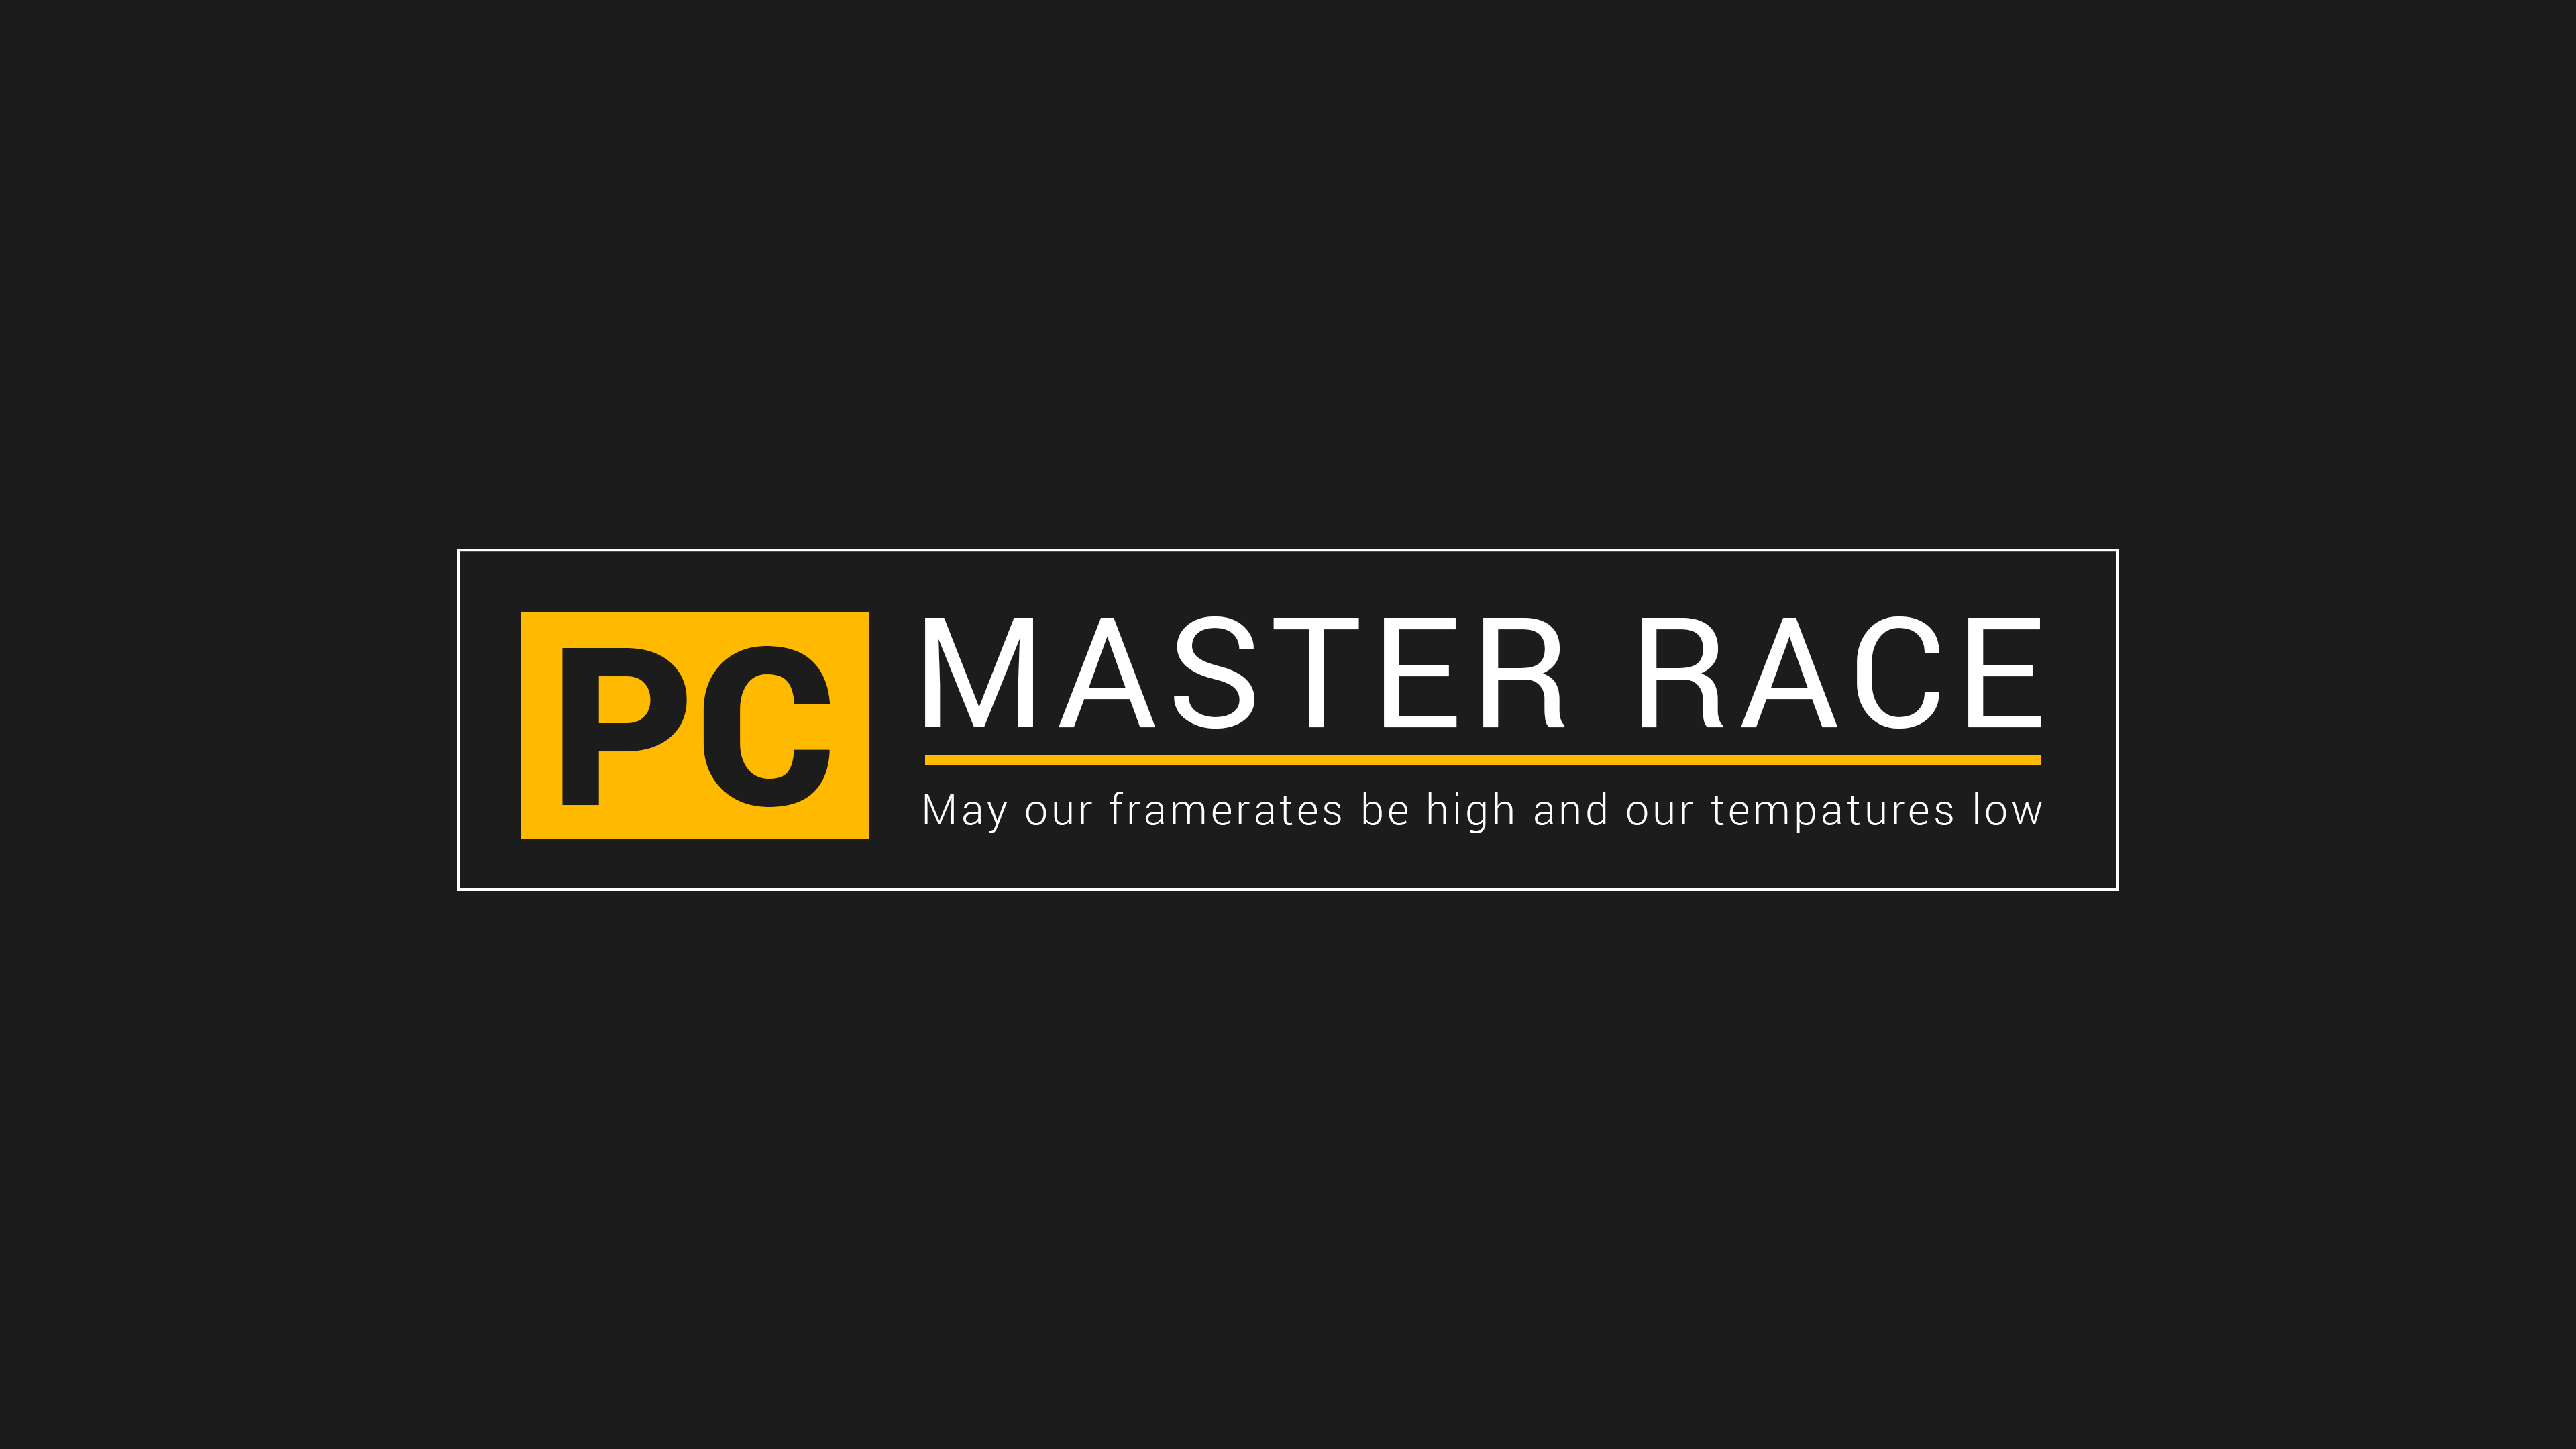 PC Master Race Take On the Wallpaper